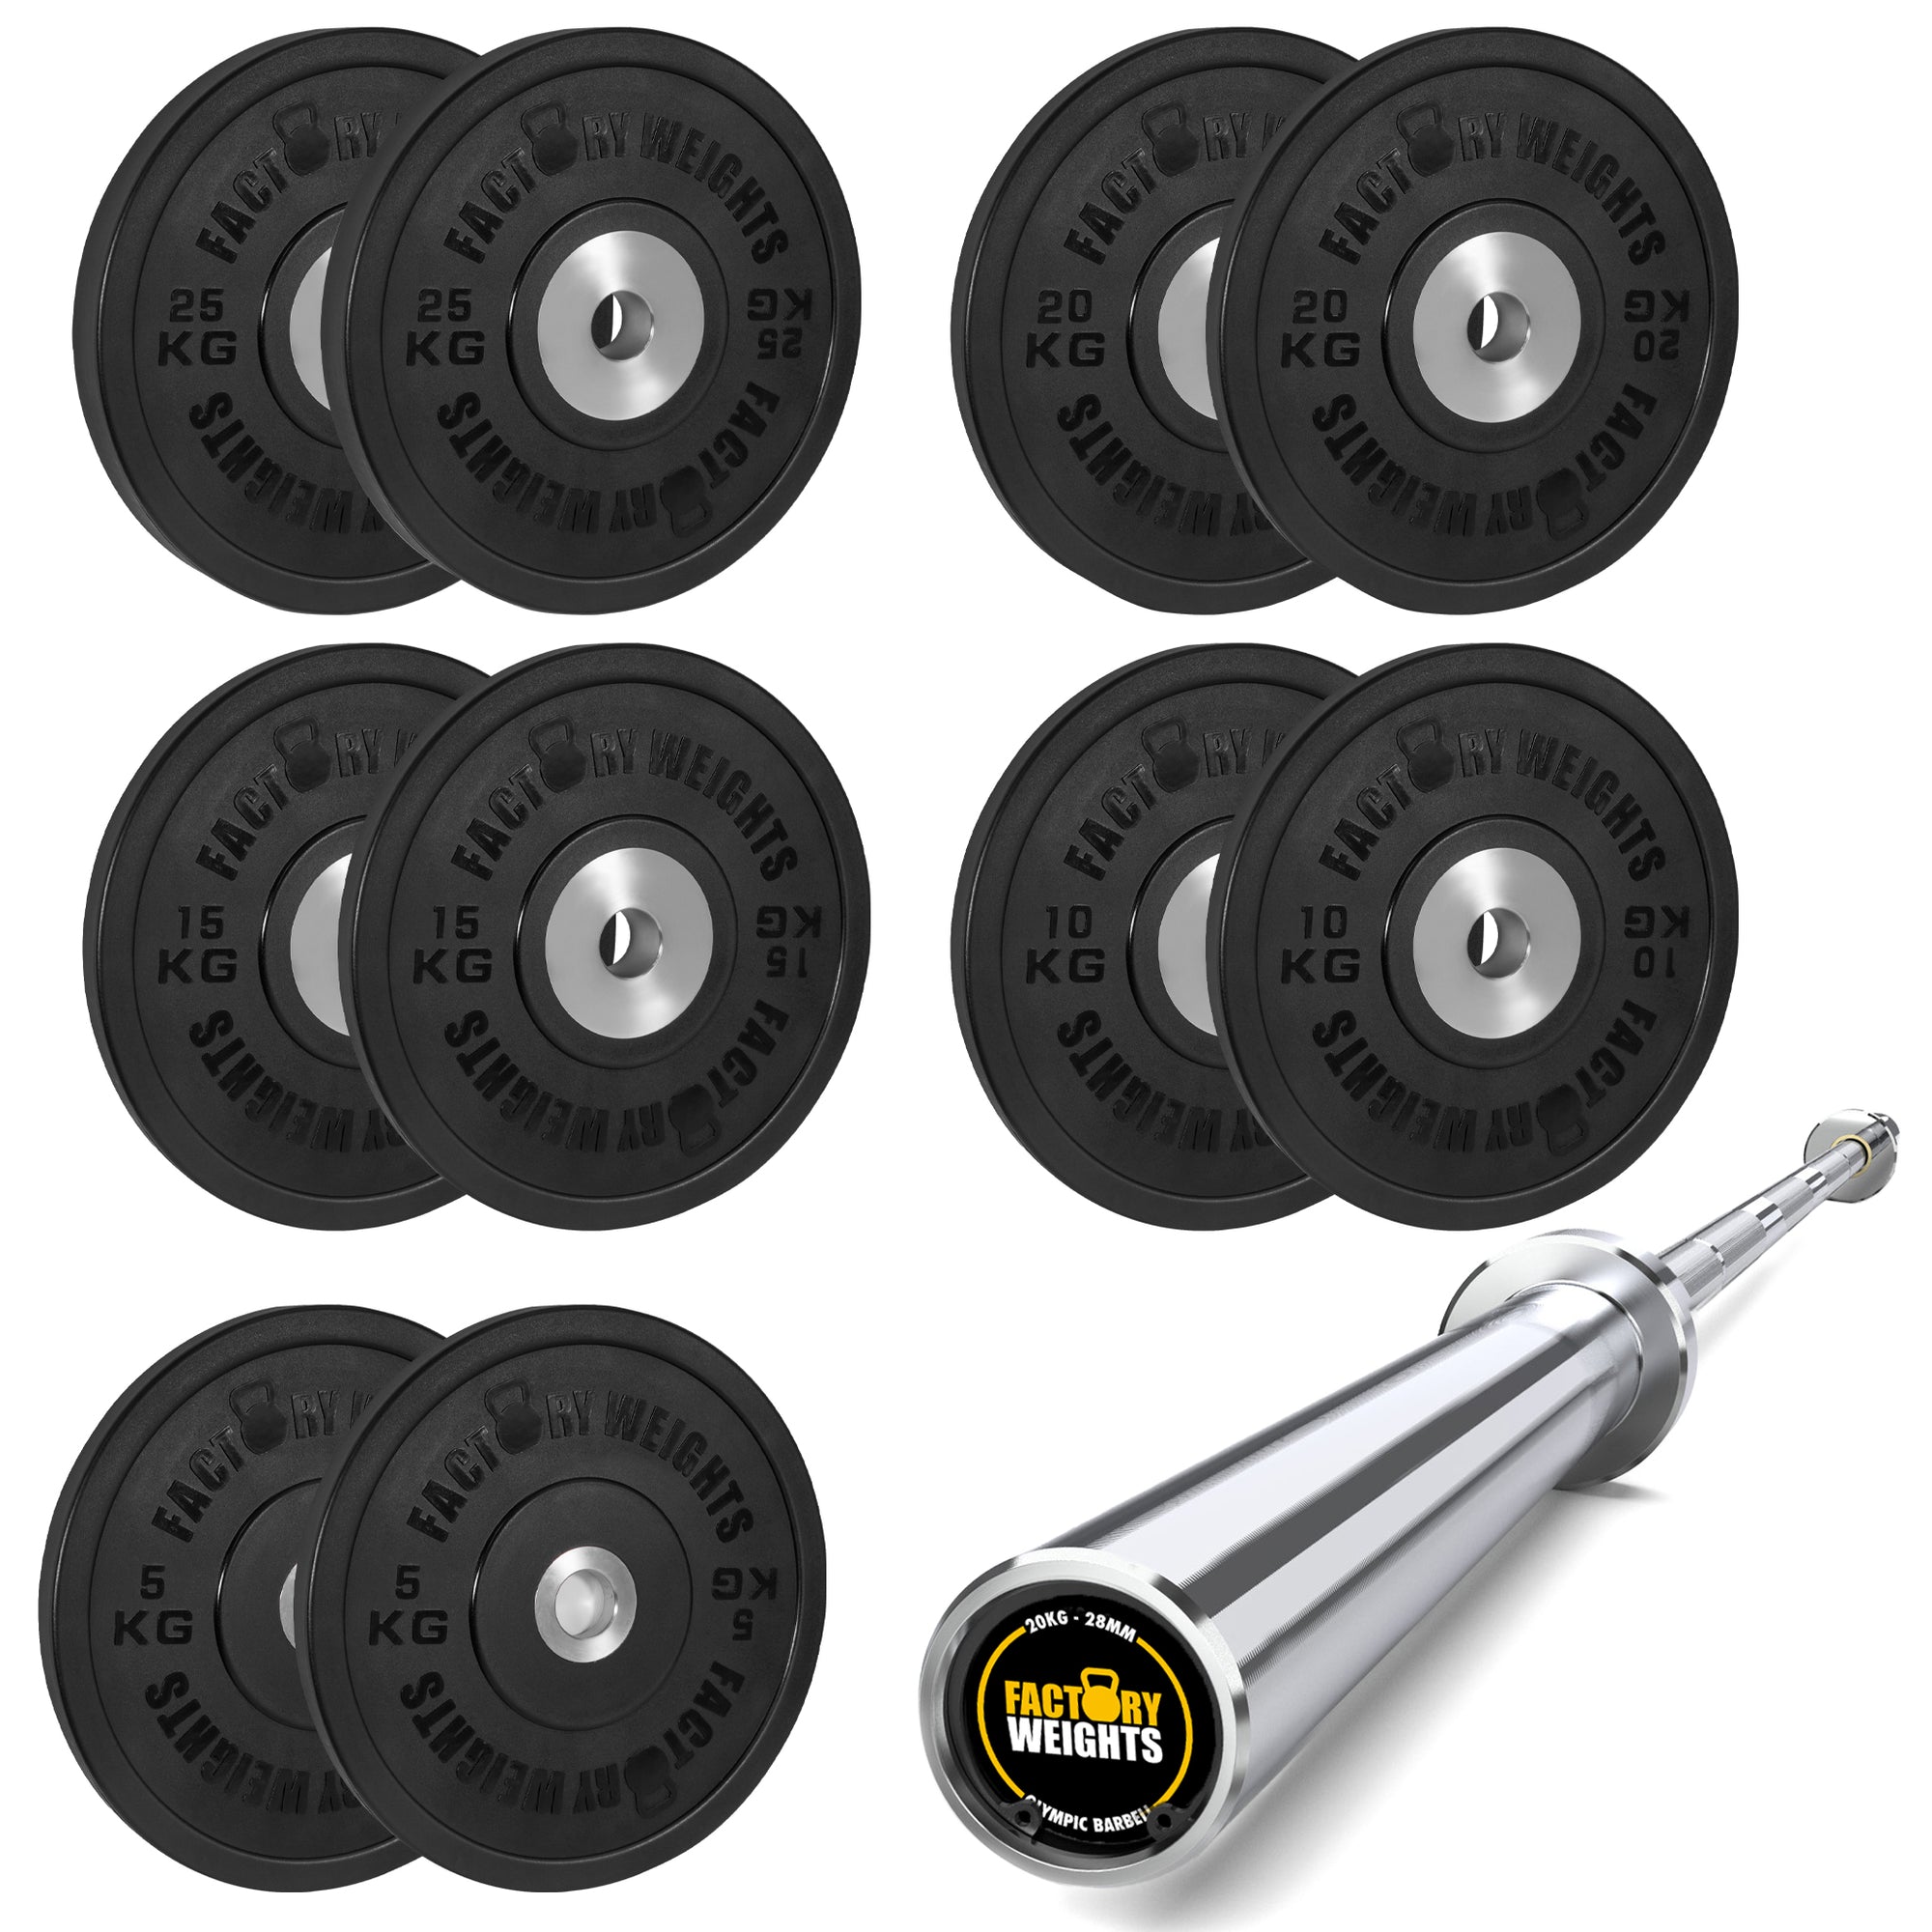 150kg Urethane Plate Set With Free 7ft Olympic Barbell